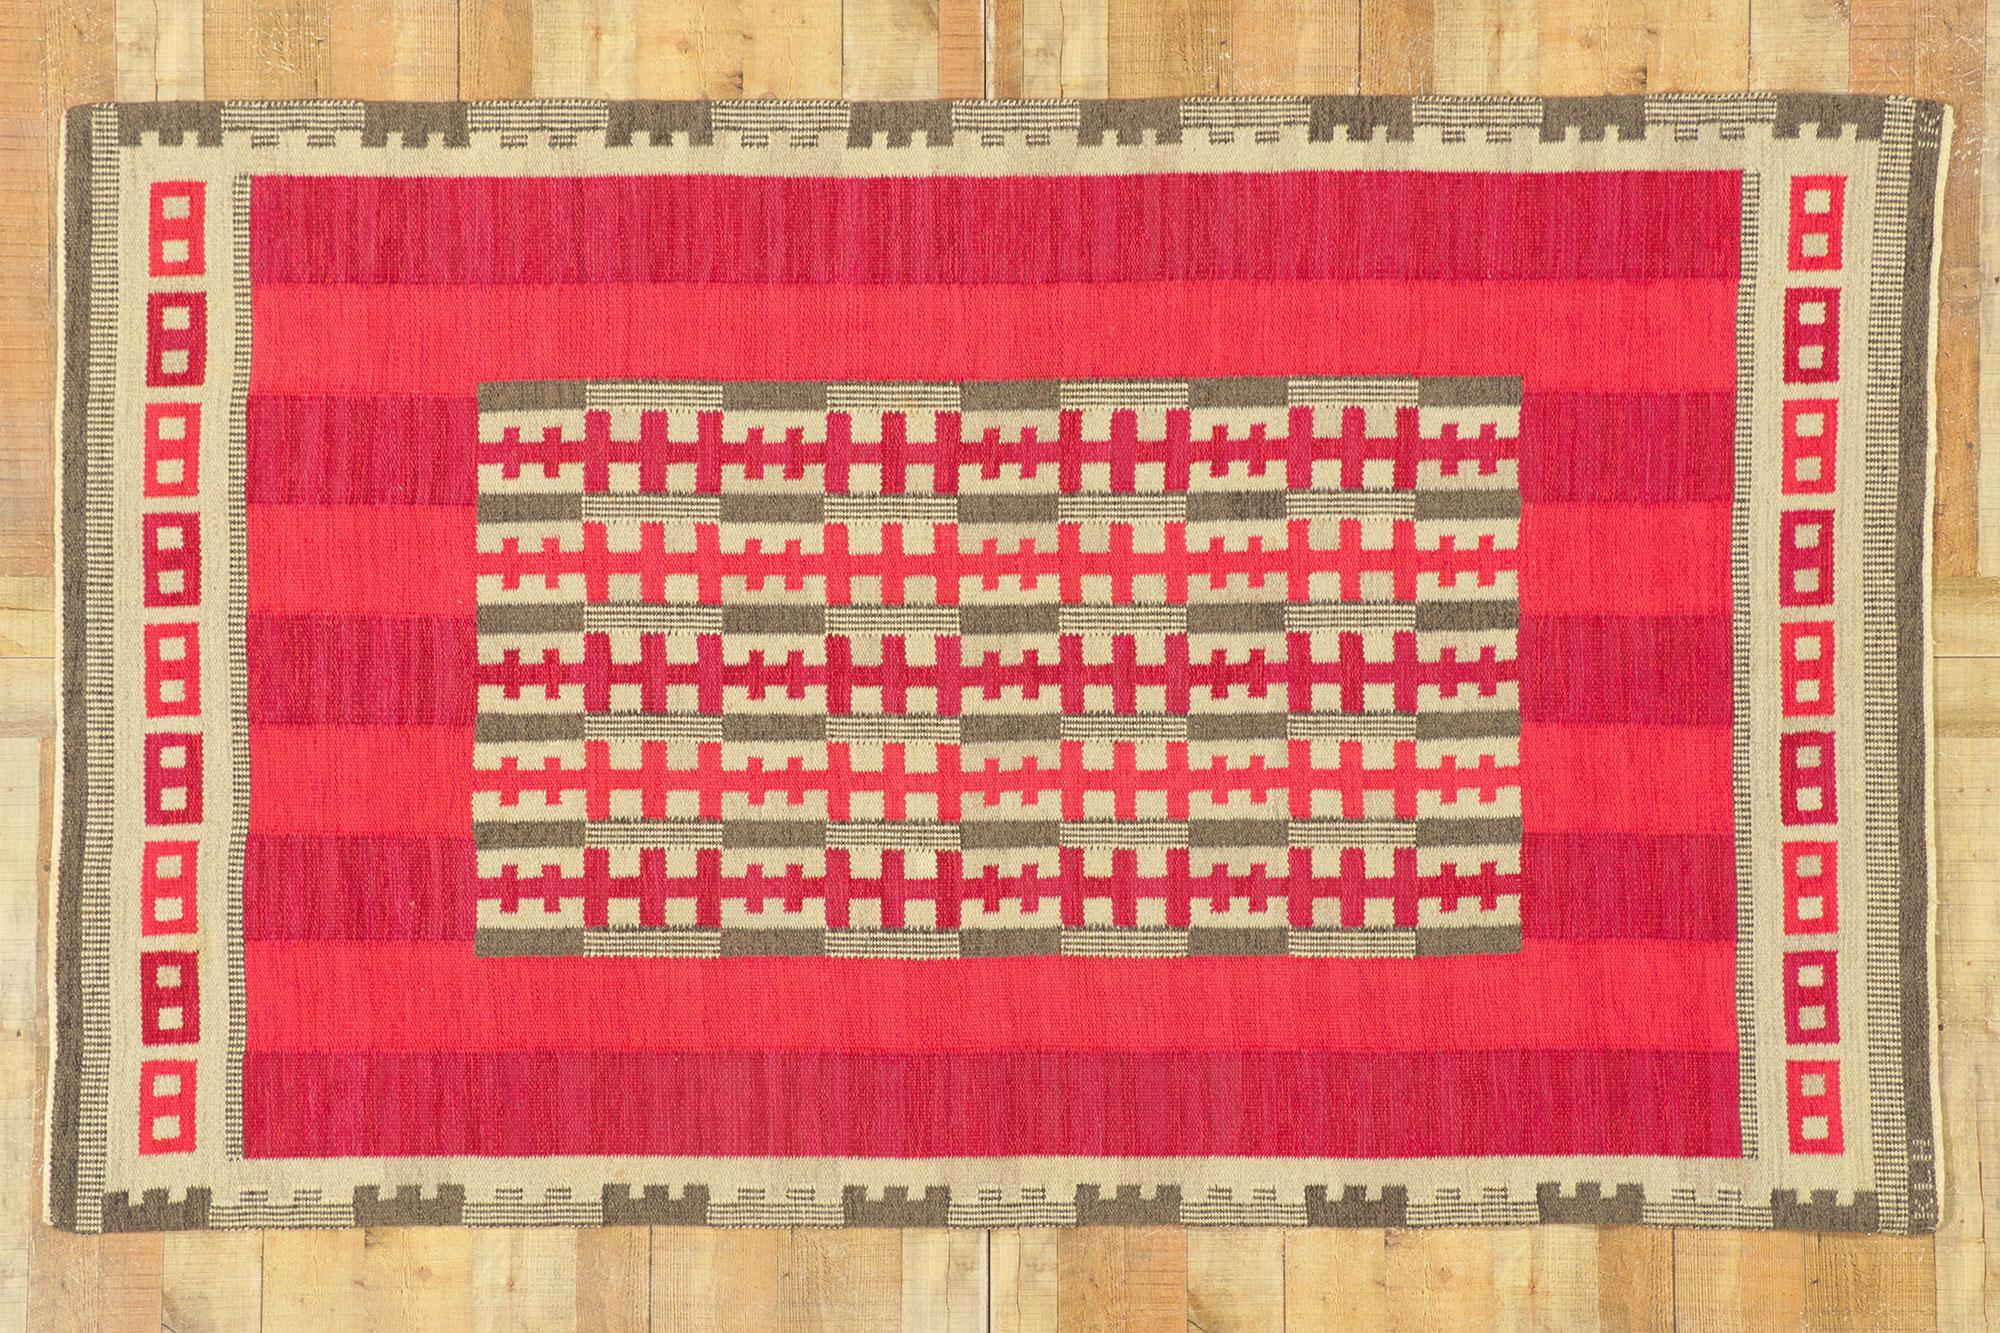 78480 Vintage Swedish Kilim Rug Rollakan, 04'10 x 07'11.
With its Scandinavian Modern style, incredible detail and texture, this handwoven wool vintage Swedish rollakan rug is a captivating vision of woven beauty. The eye-catching geometric design